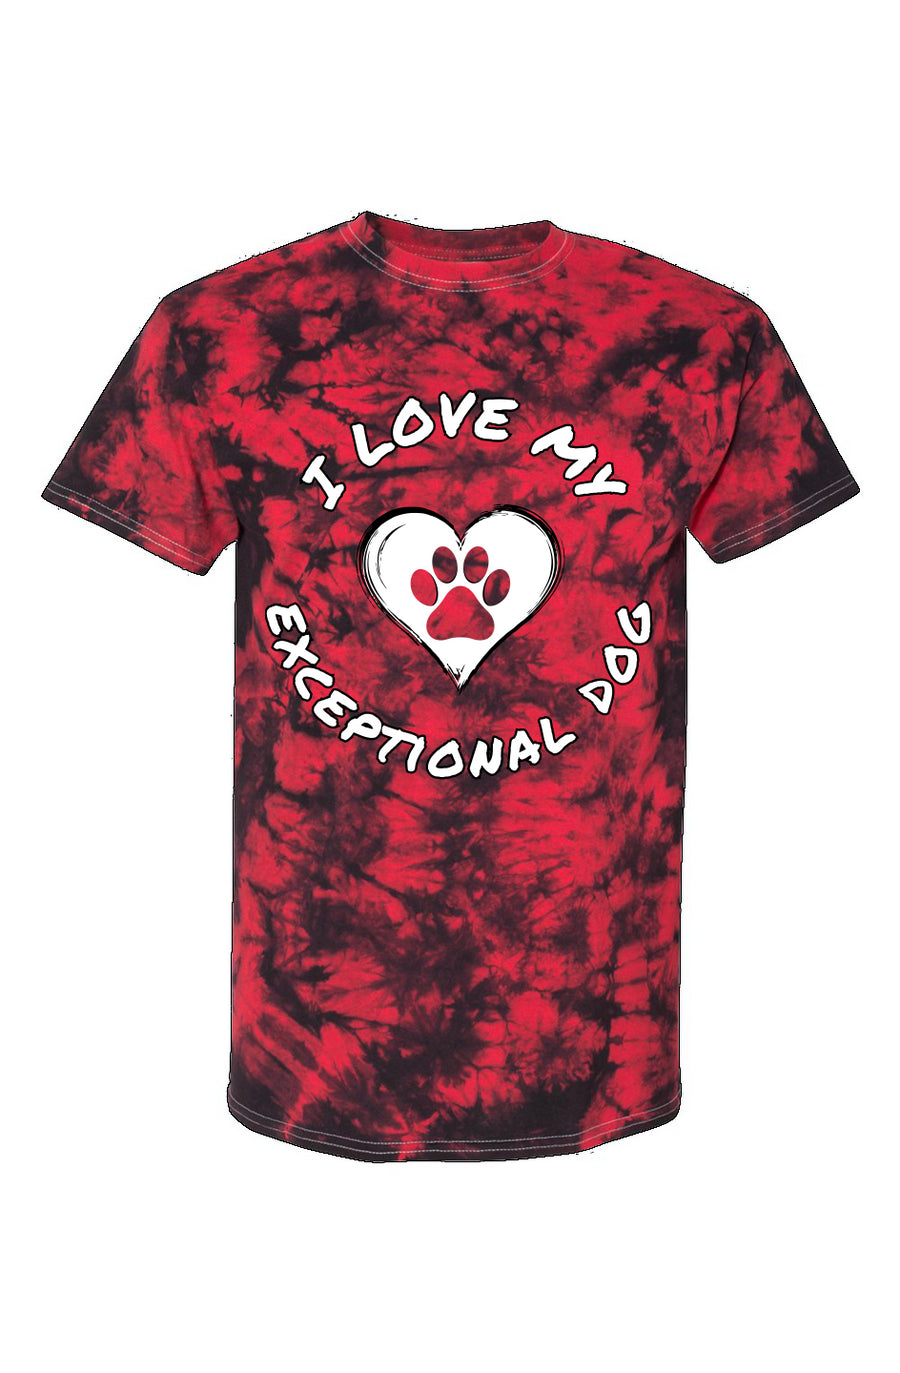 I Love My Exceptional Dog | Red Crystal Tie-Dye Tee is a black and red tie dye t shirt with white text in a circle. The top line of text is I love my and the bottom line of text is exceptional dog. Centered in the circle of text is a heart with a paw print. 